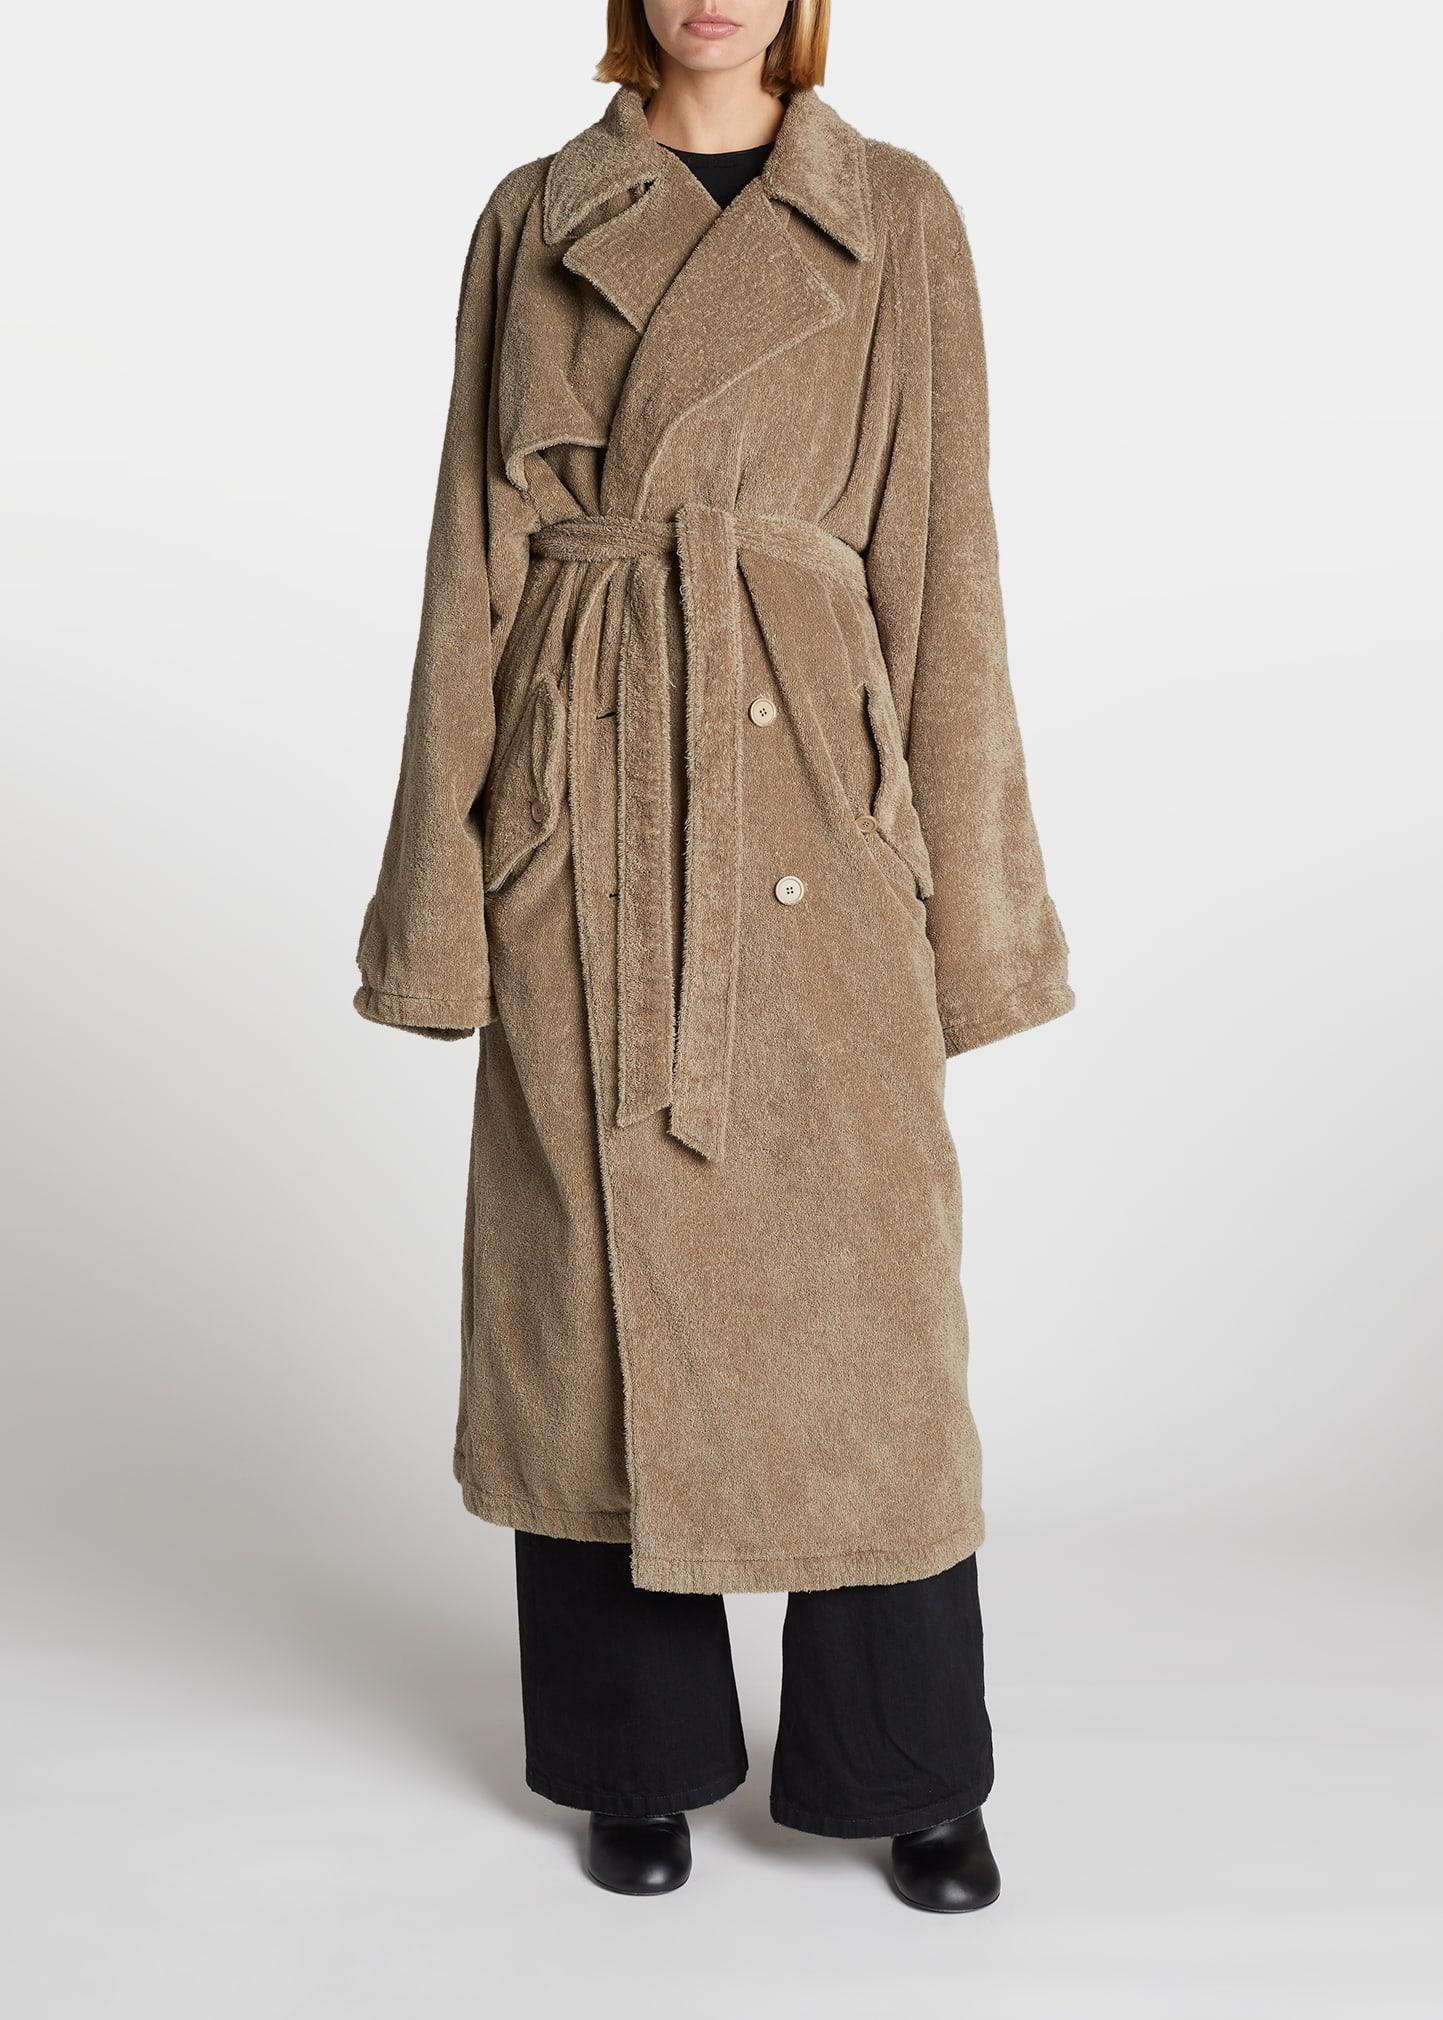 Balenciaga Towelling Belted Long Trench Coat in Natural | Lyst